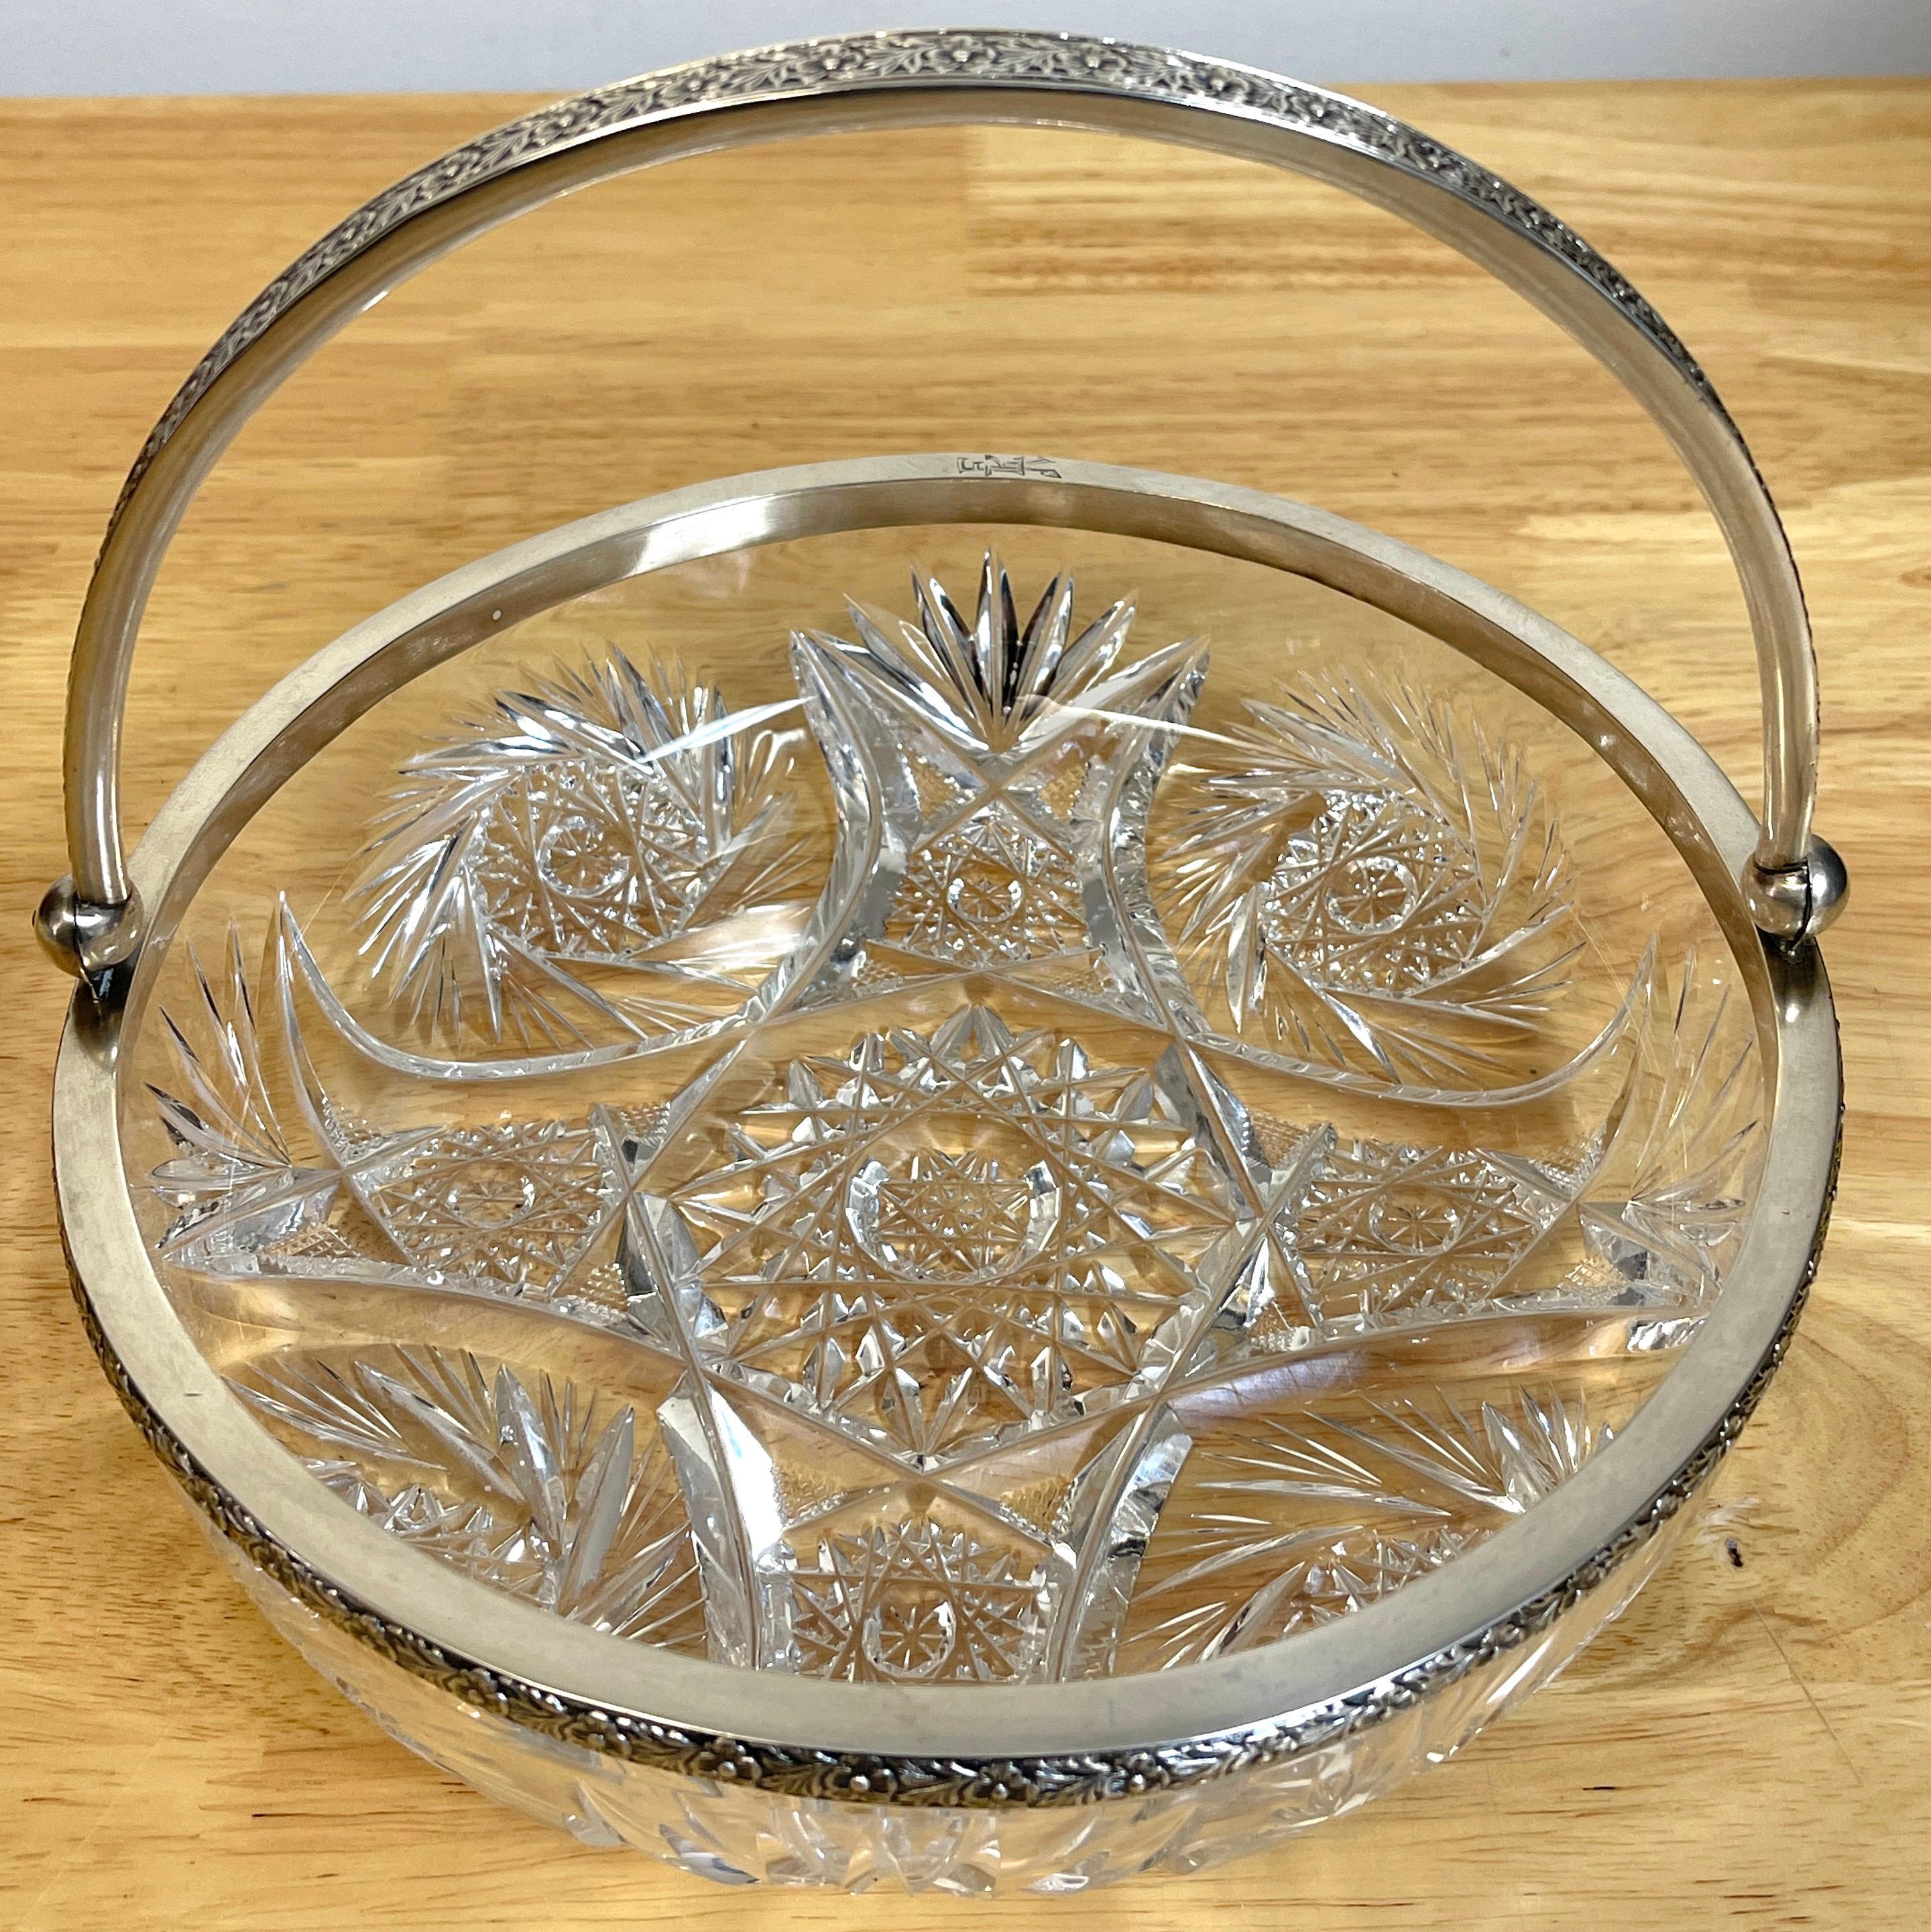 19th-century Russian silver and cut glass swing-handled basket
Russia, circa 1880
Stamped in a rectangular cartouche. 875 grade 

Immerse yourself in the opulence of 19th-century Russian workmanship with this exquisite silver and cut glass